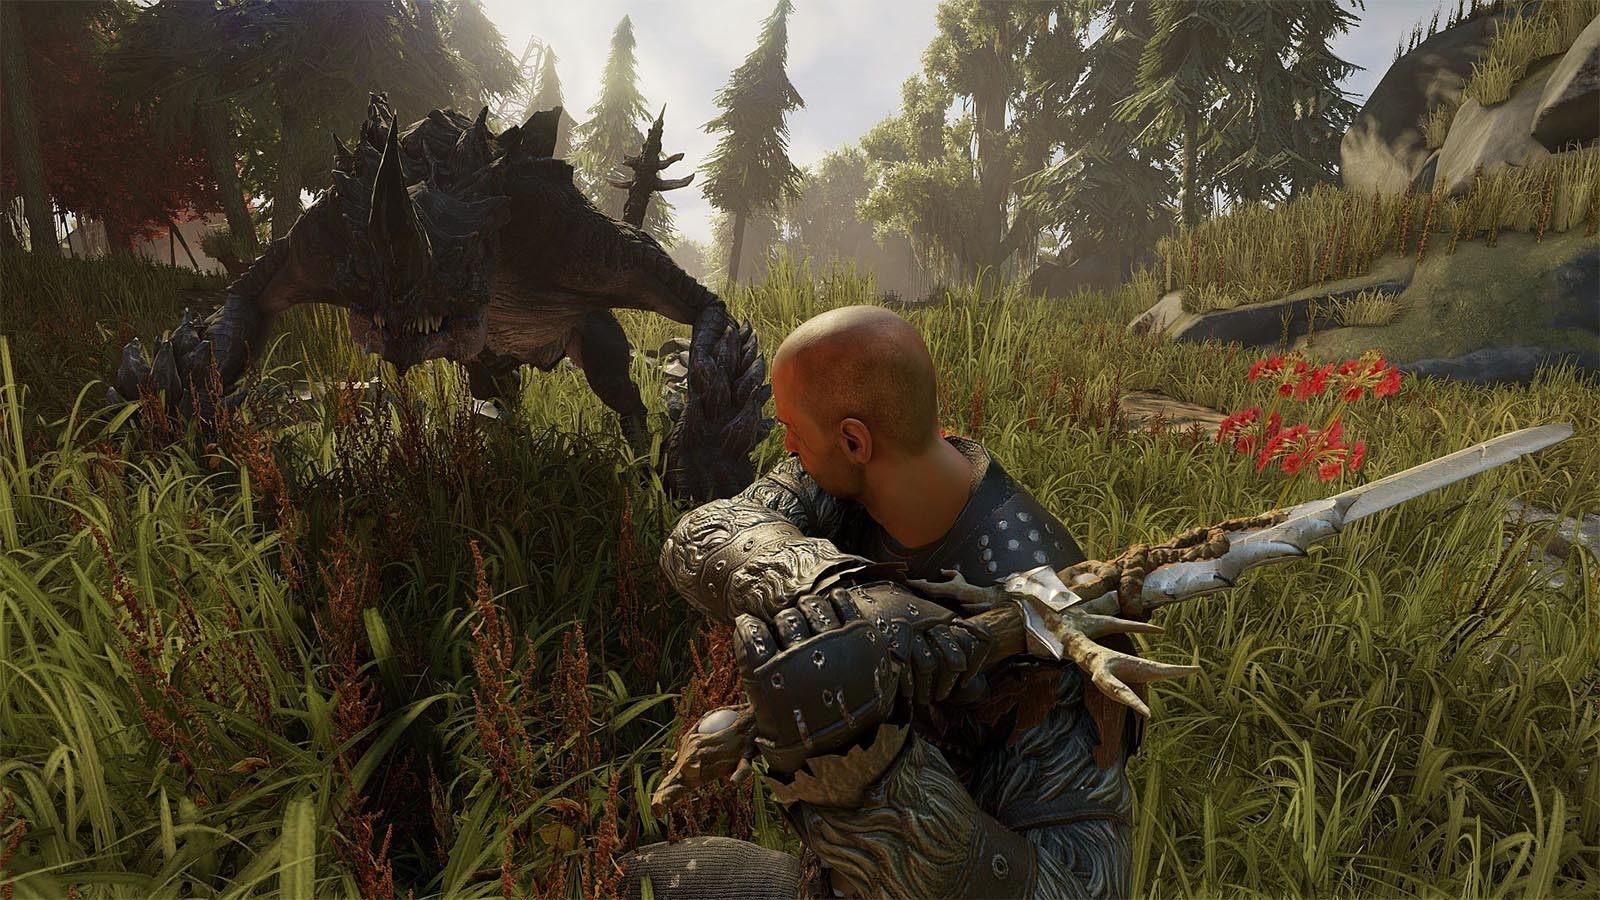 ELEX blends fantasy and science fiction